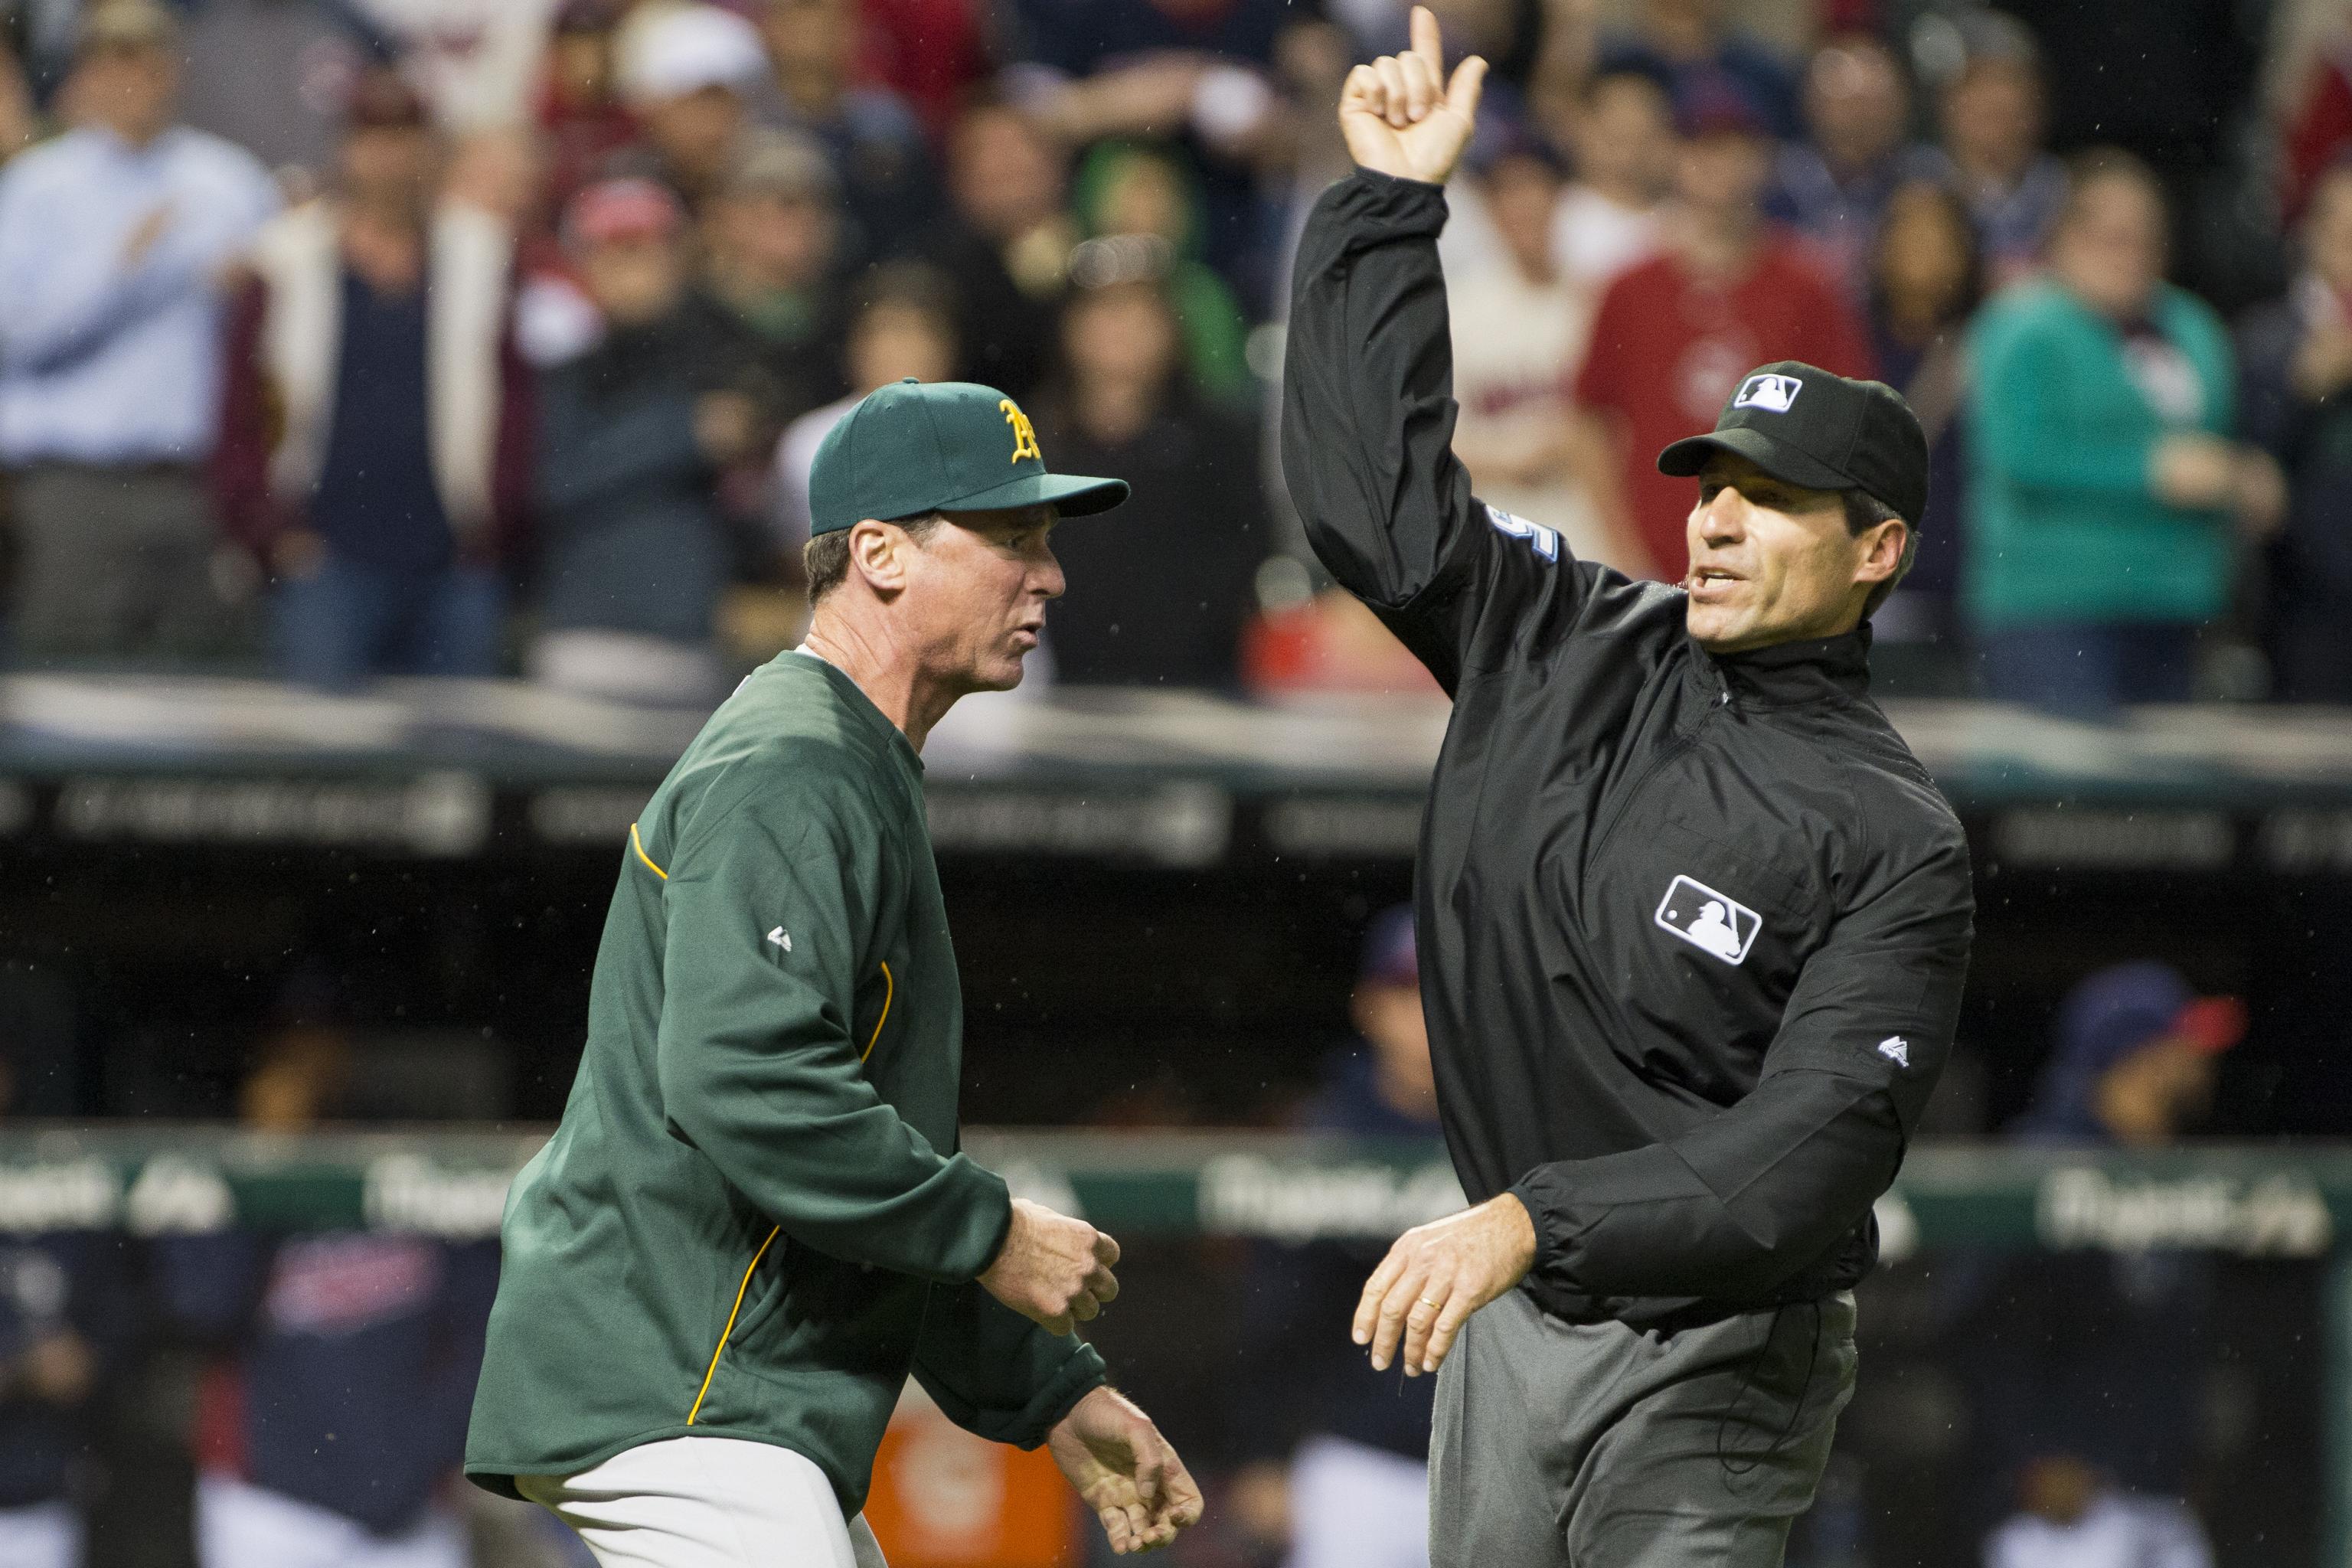 Plate ump leaves A's-Angels game after getting hit twice